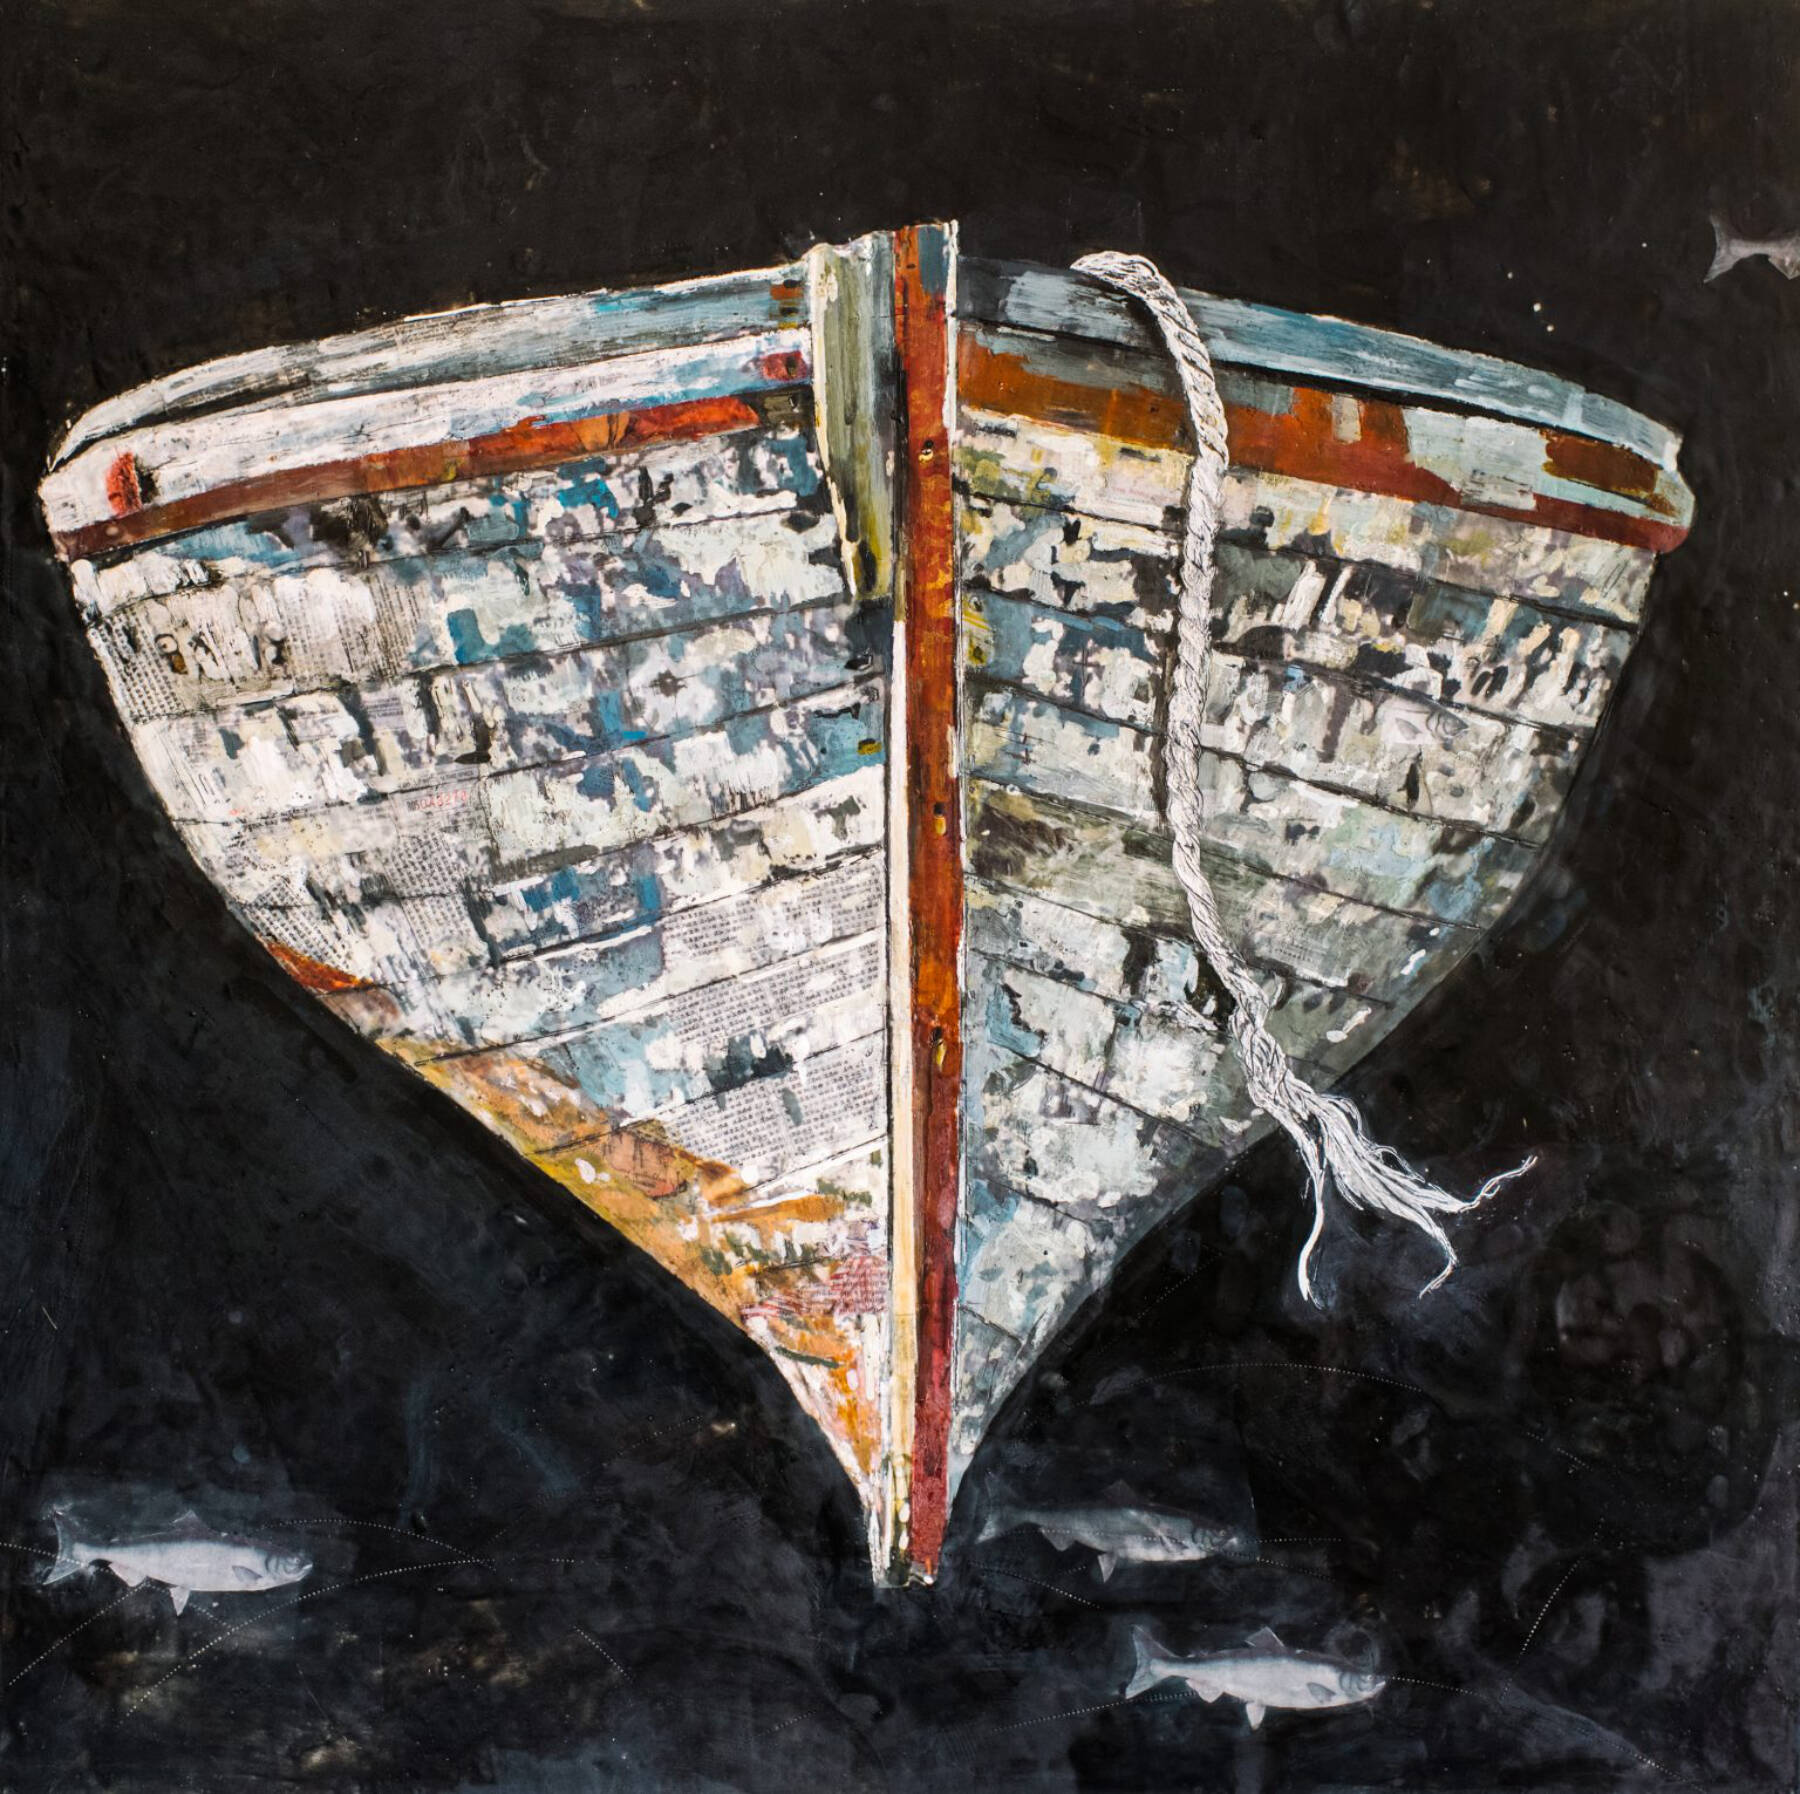 “Boat,” a painting by Antoinette Walker, is on display at Bunnell Street Art Center through June. Photo provided by Bunnell Street Art Center